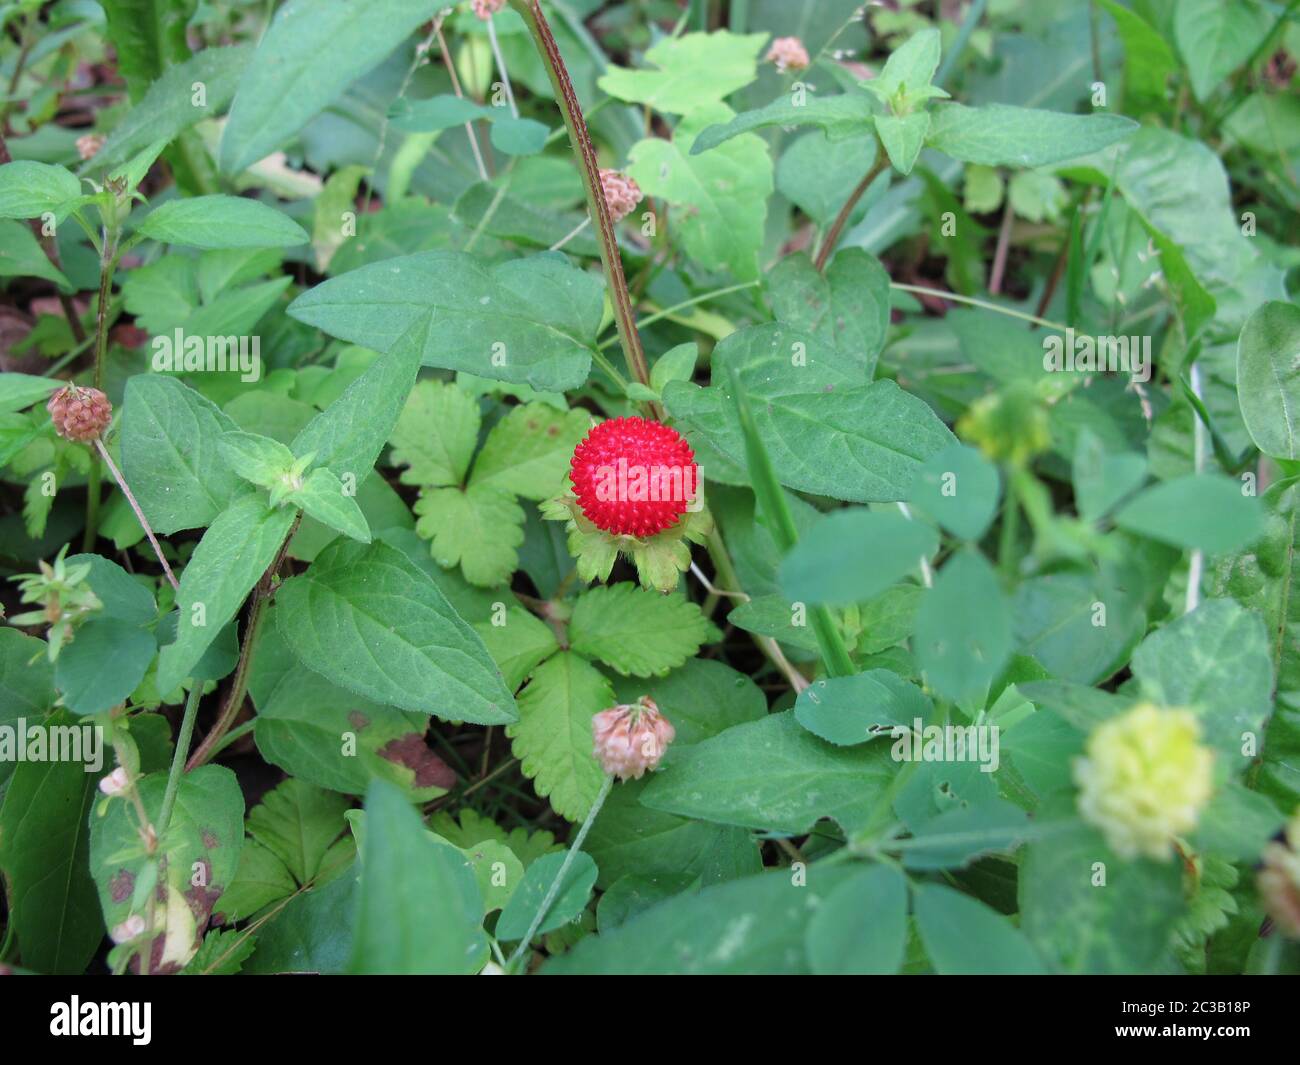 Red Indian strawberry, Potentilla indica, between weeds Stock Photo